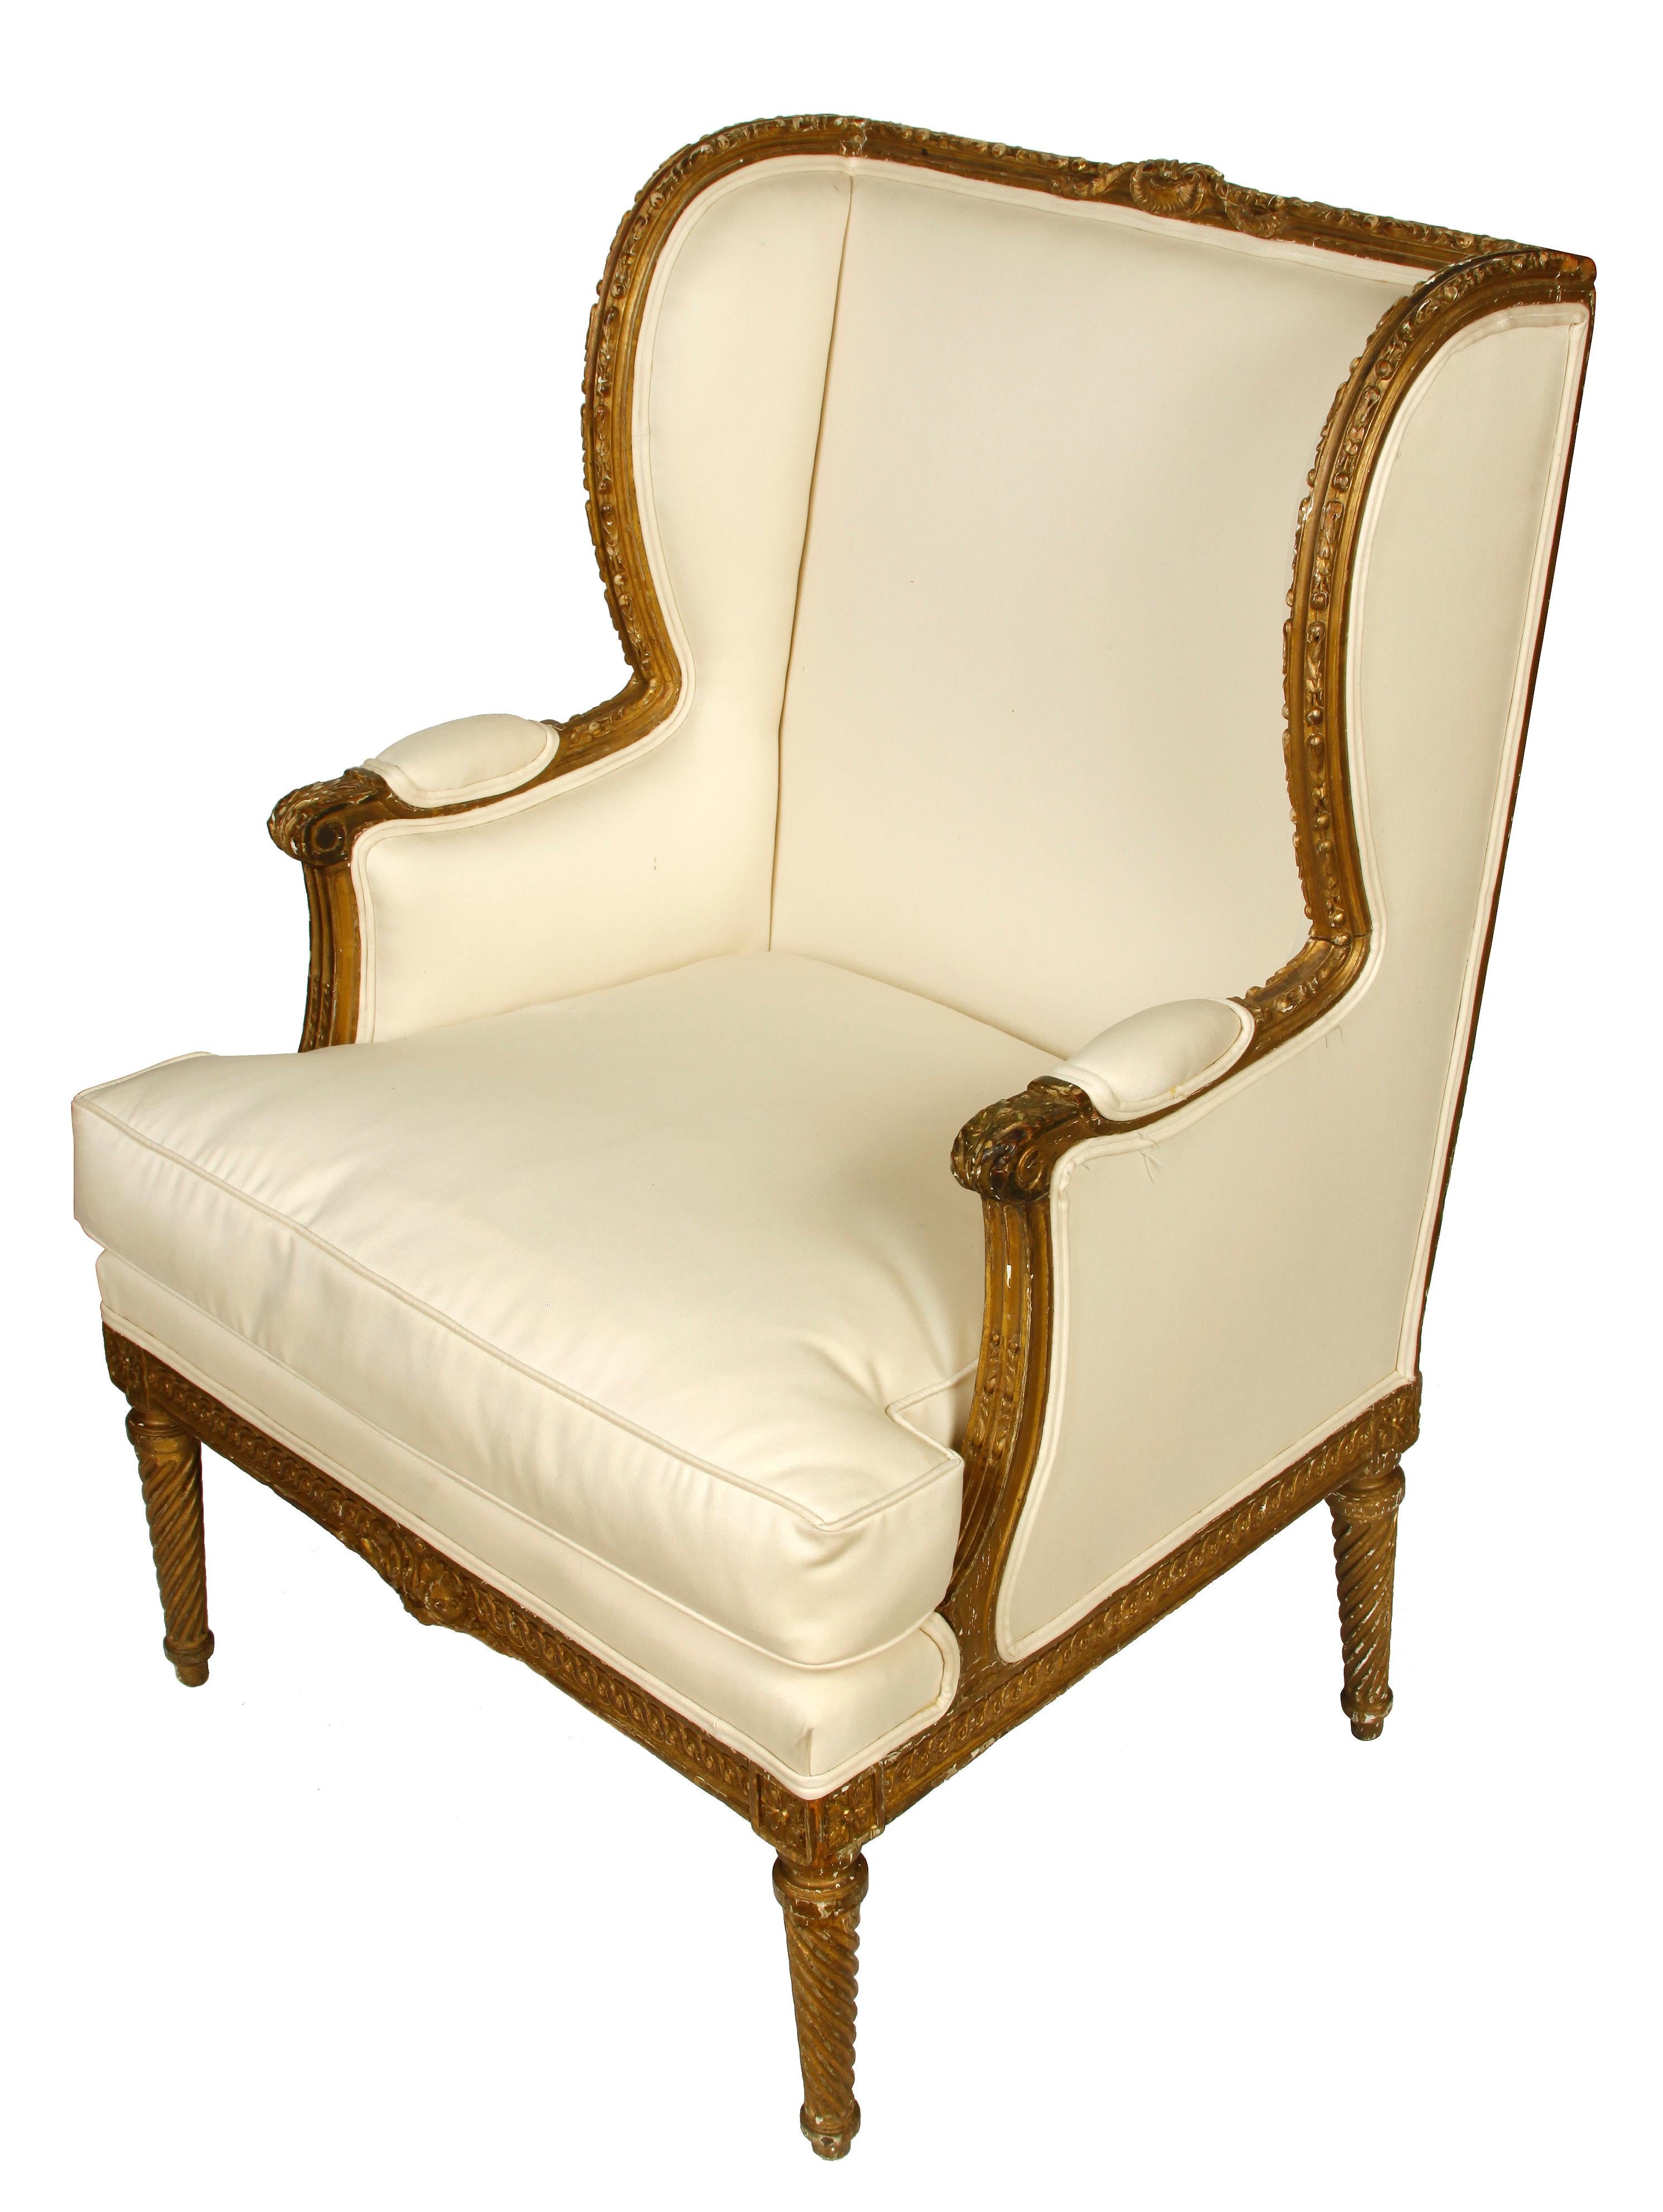 French style bergere with giltwood finish and ivory upholstery.